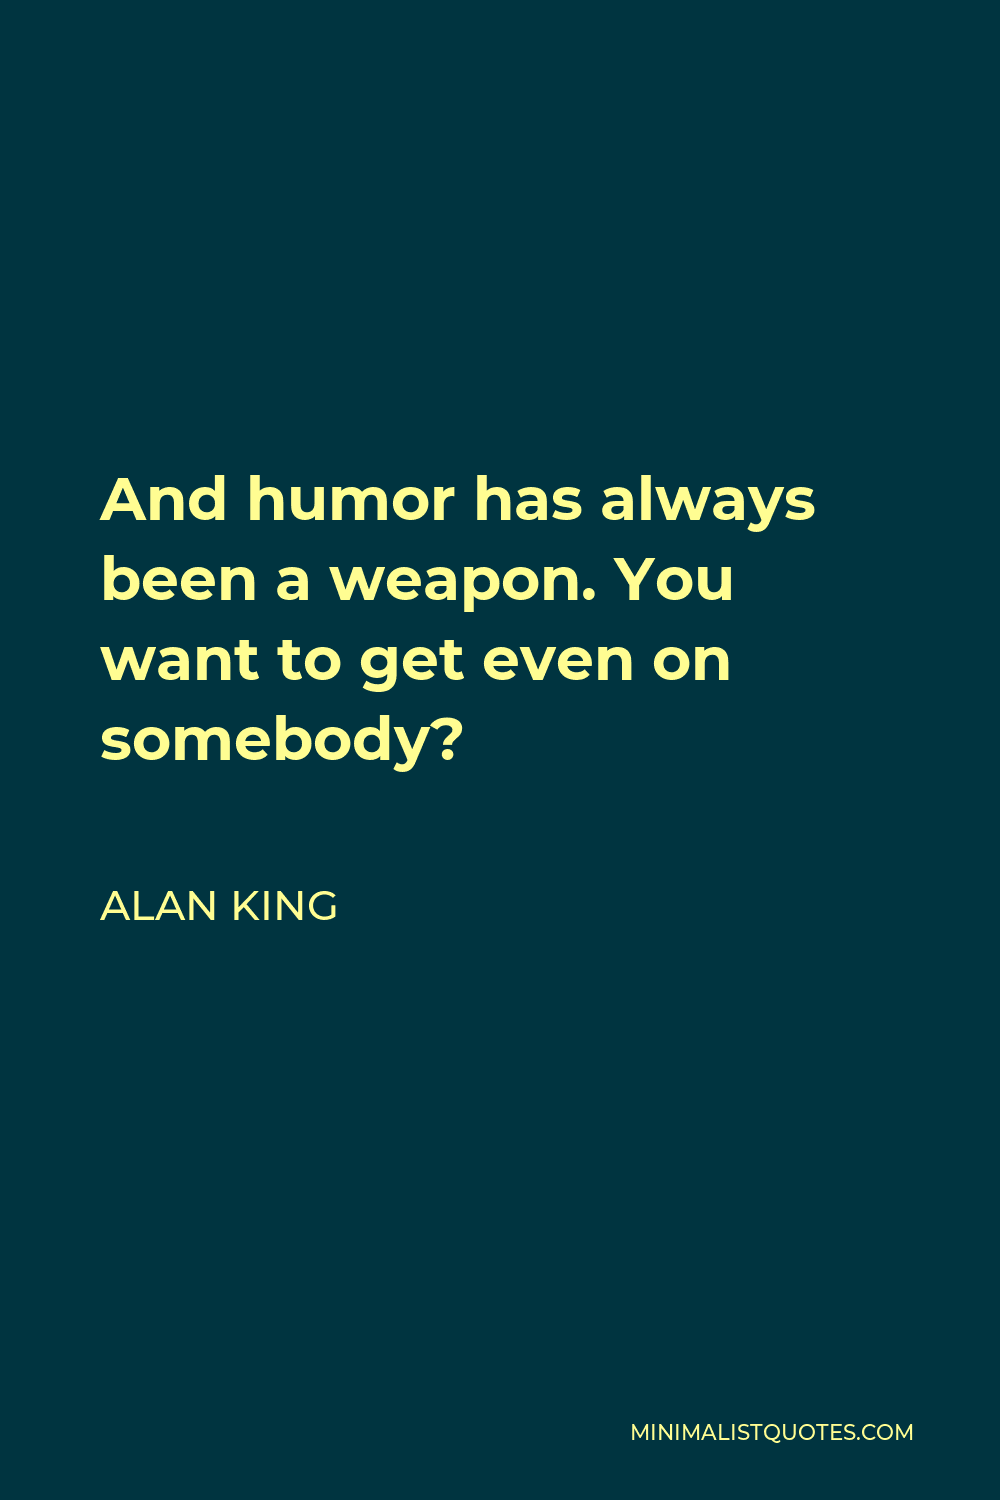 Alan King Quote - And humor has always been a weapon. You want to get even on somebody?